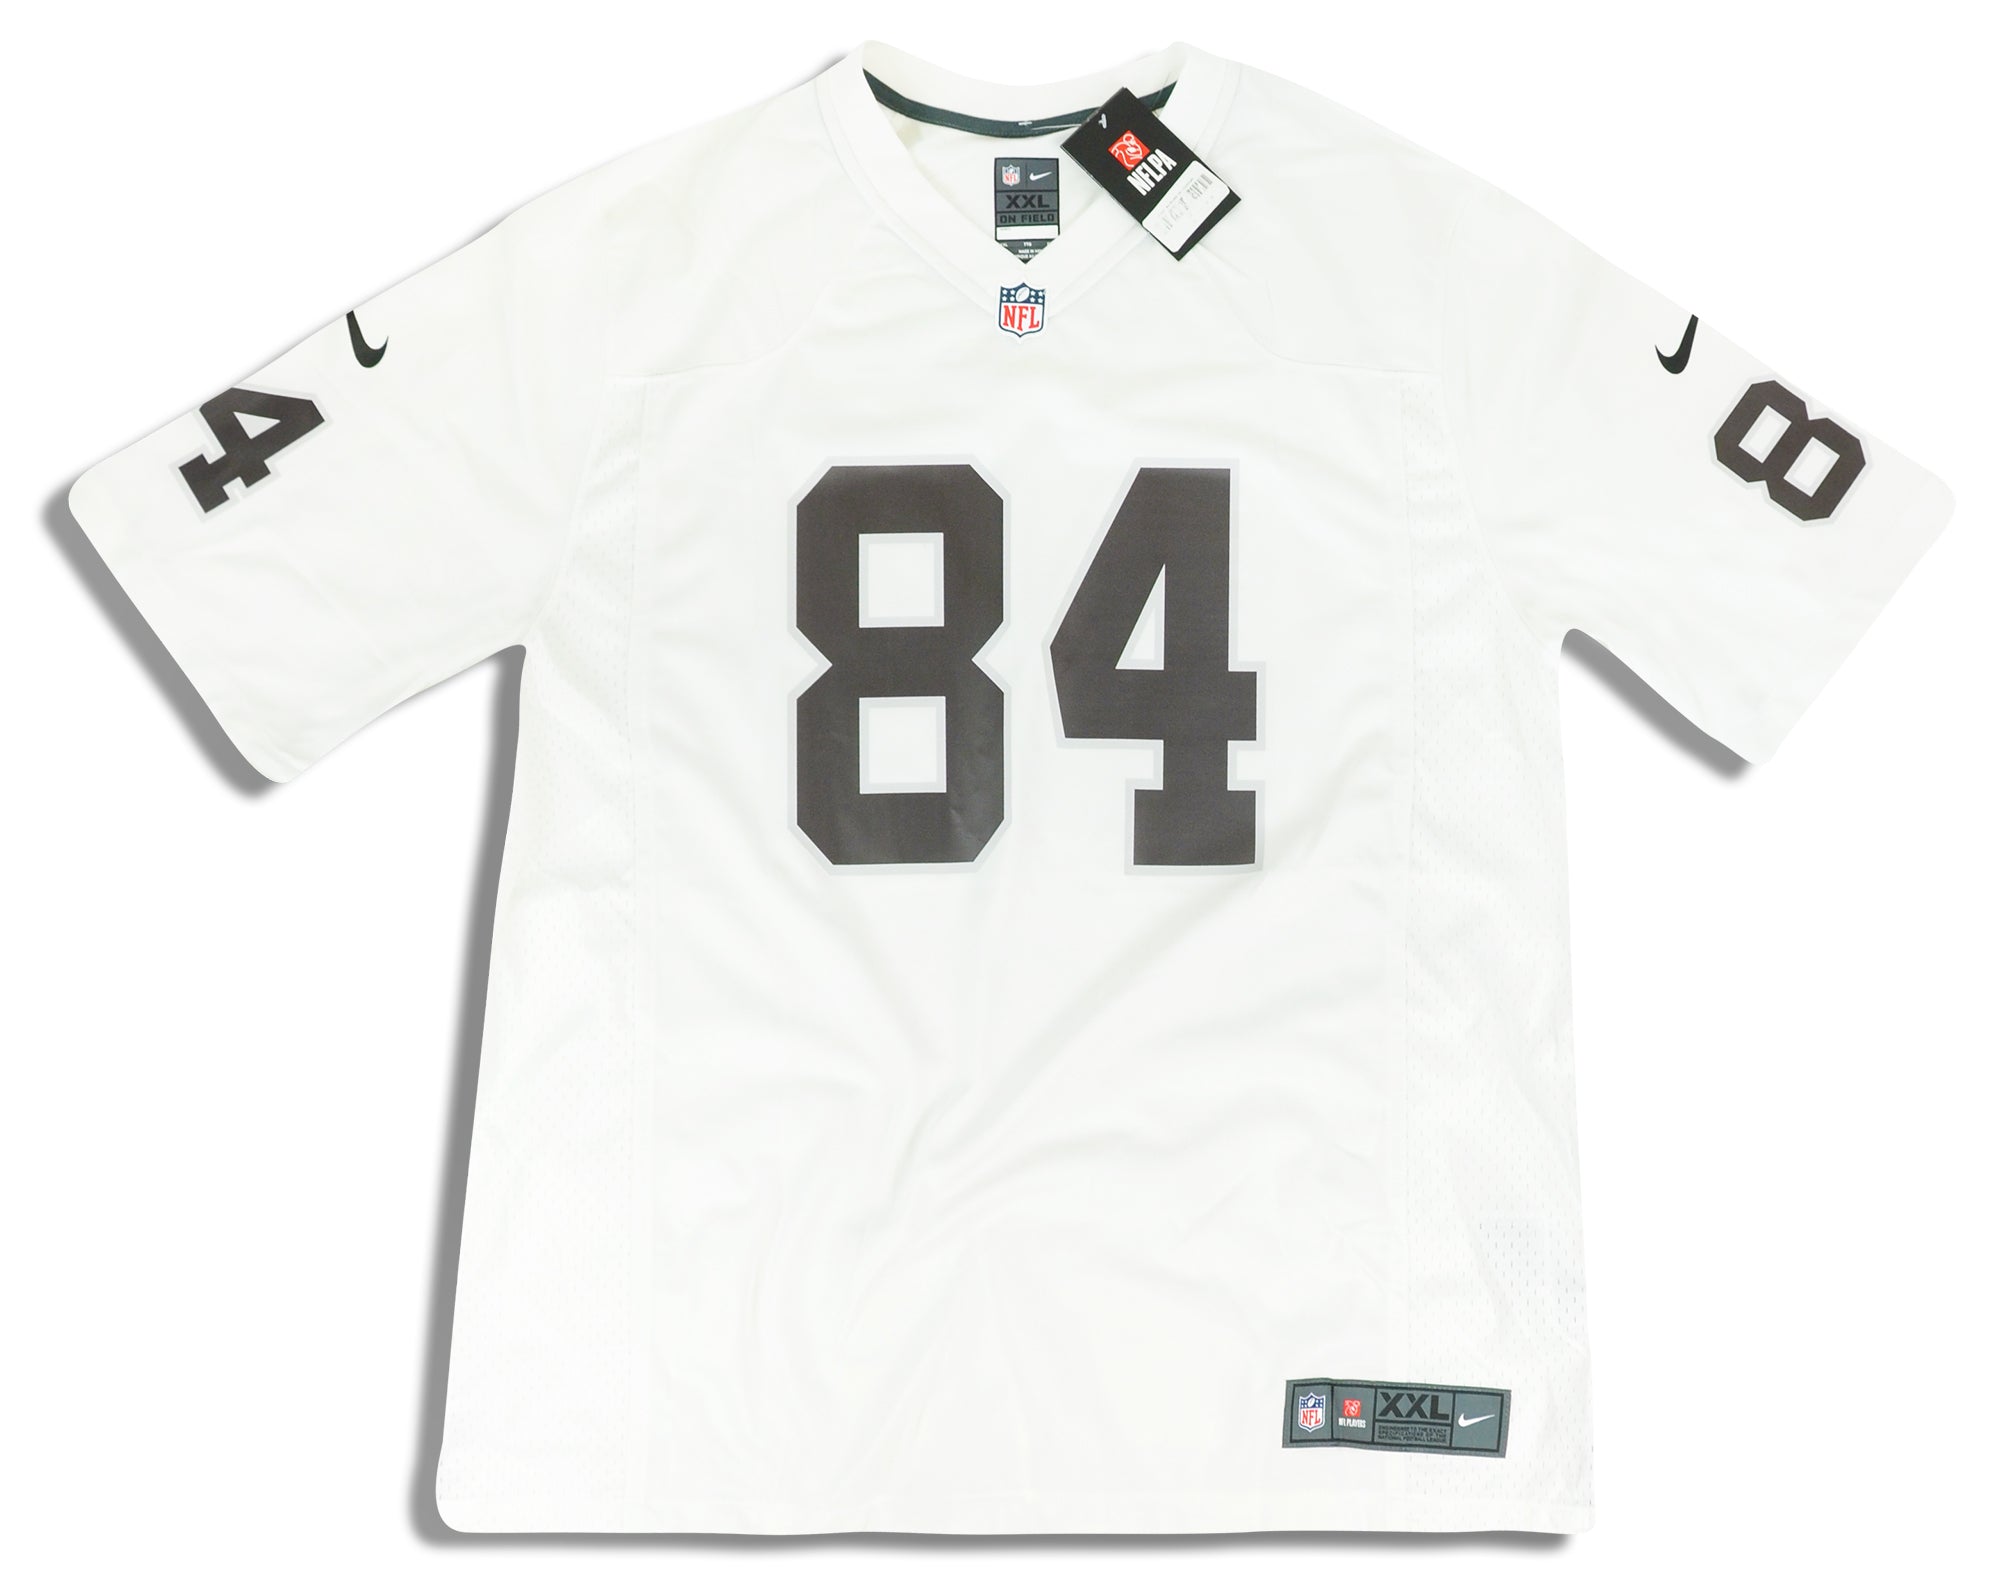 2019 OAKLAND RAIDERS BROWN #84 NIKE GAME JERSEY (AWAY) XXL - W/TAGS -  Classic American Sports